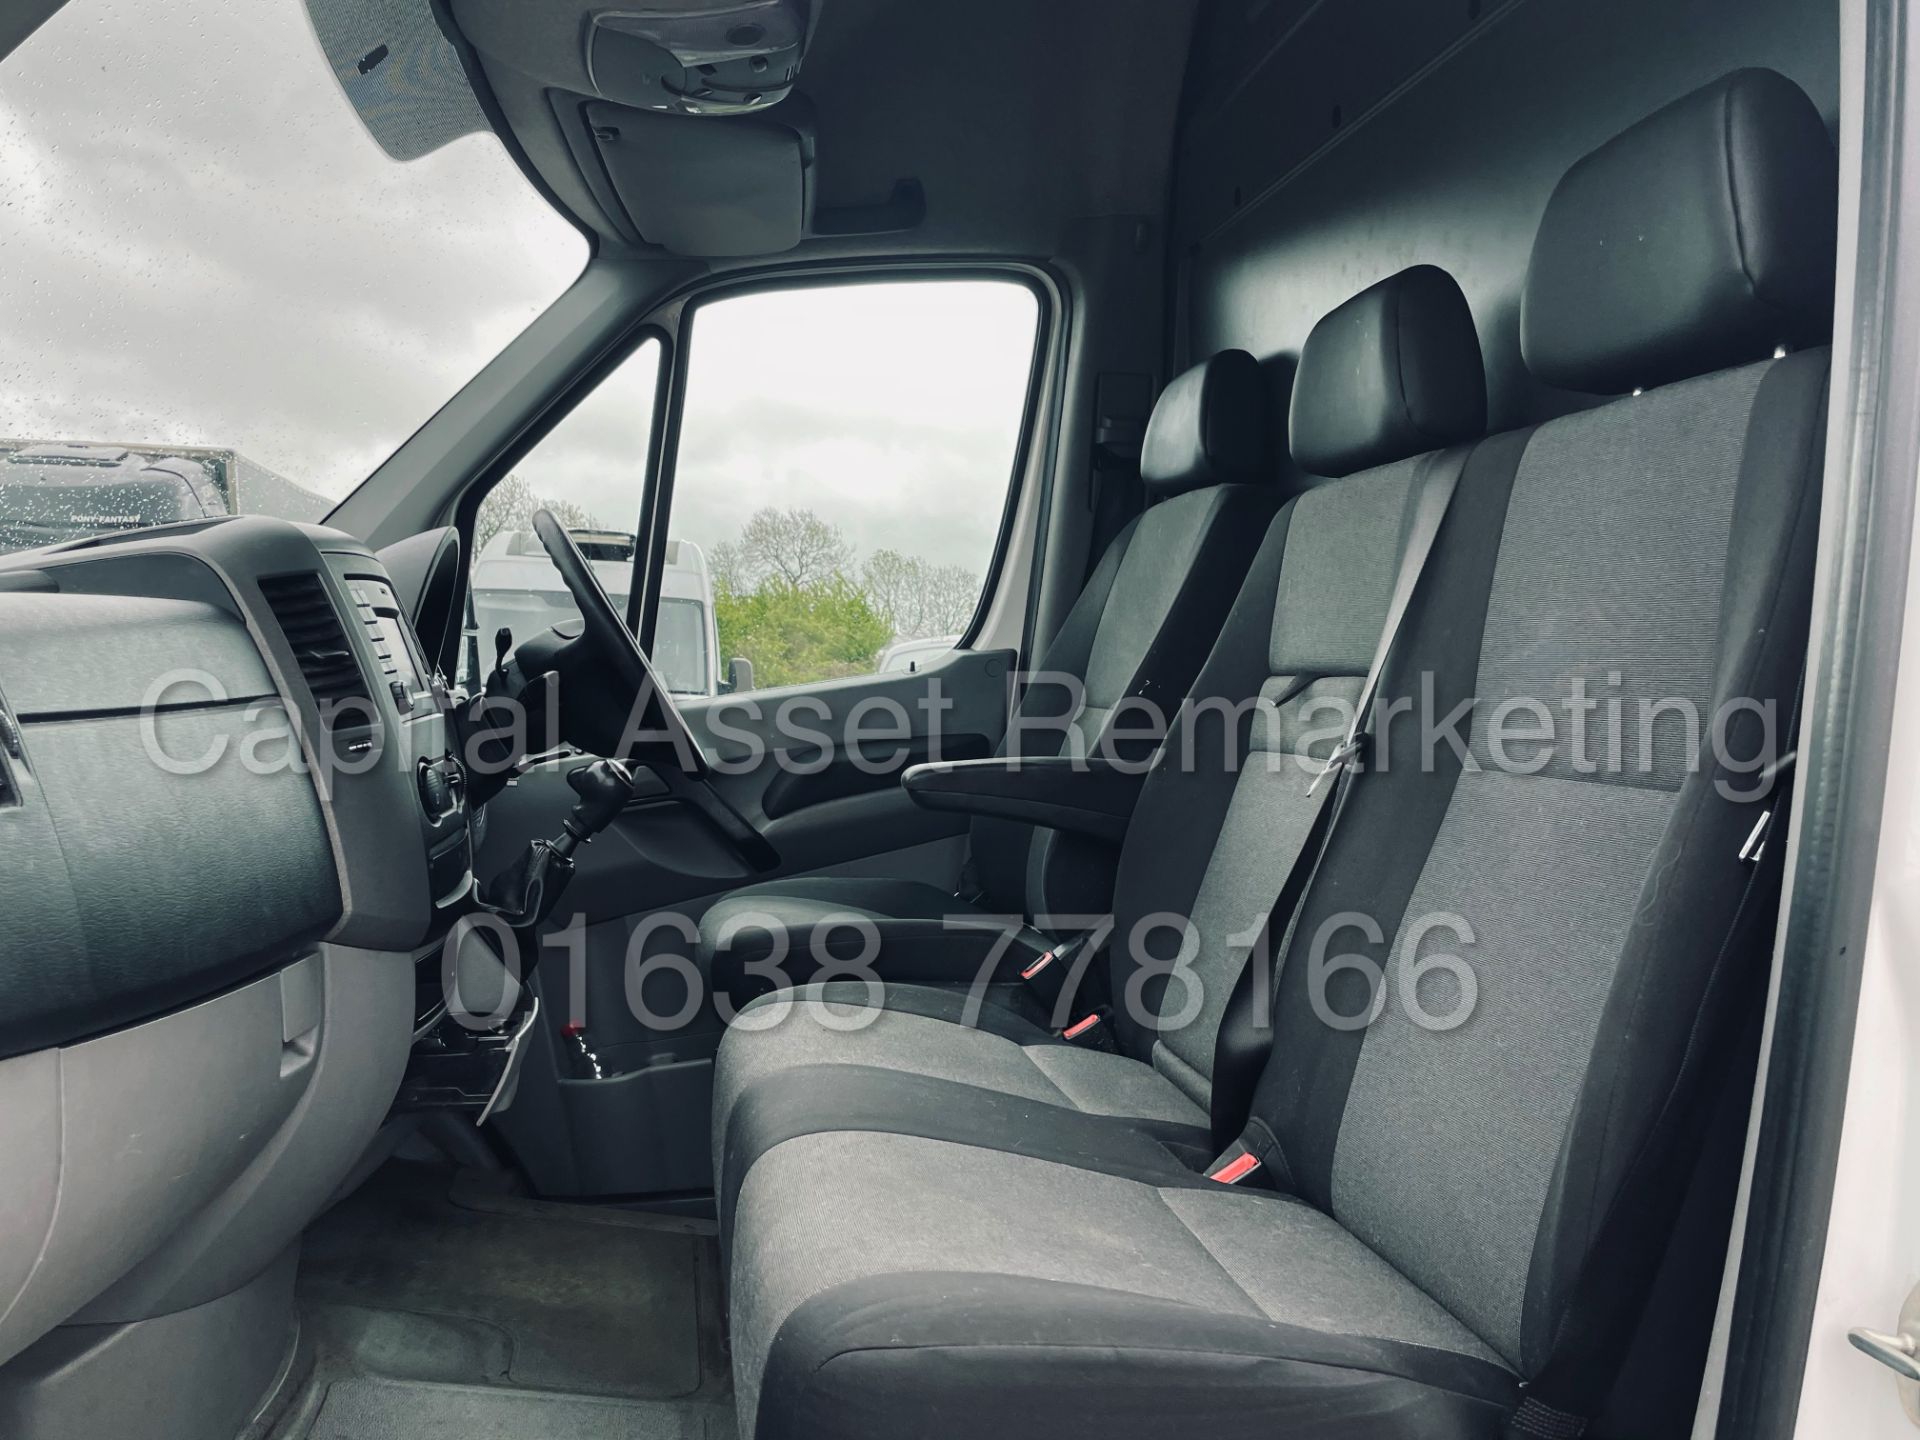 (On Sale) VOLKSWAGEN CRAFTER *LWB HI-ROOF* (2017 - EURO 6) '2.0 TDI BMT - 6 SPEED' *CRUISE CONTROL* - Image 21 of 39